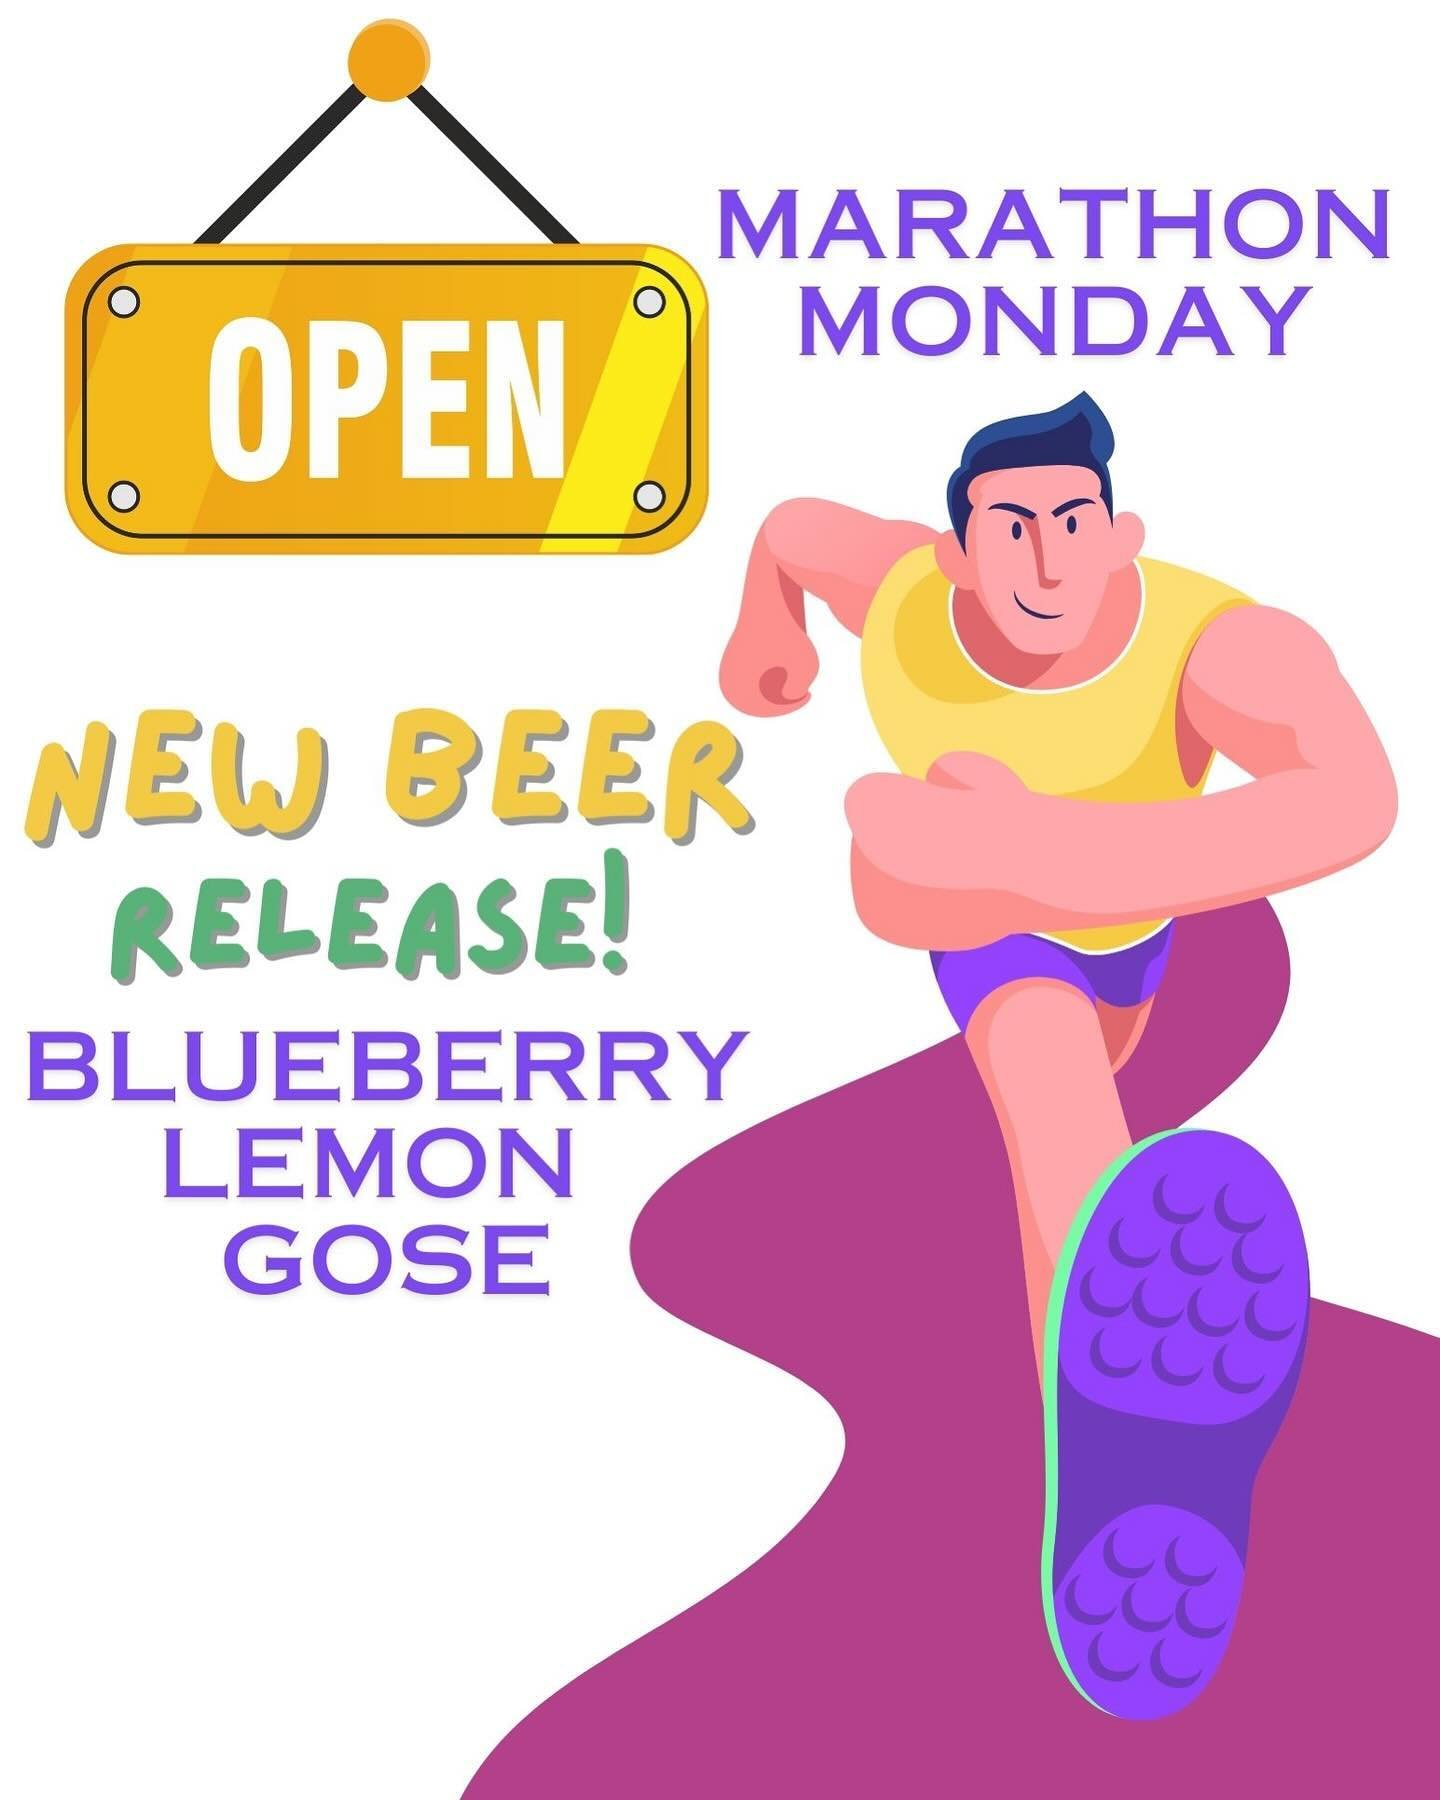 We will be open this Monday &amp; releasing our latest Grove Street Gose series Blueberry Lemon.  Good luck to all the runners out there.  Catch Becca serving up water (not beer, weird huh?) at mile 23, Jake cheering you on in Washington Square &amp;